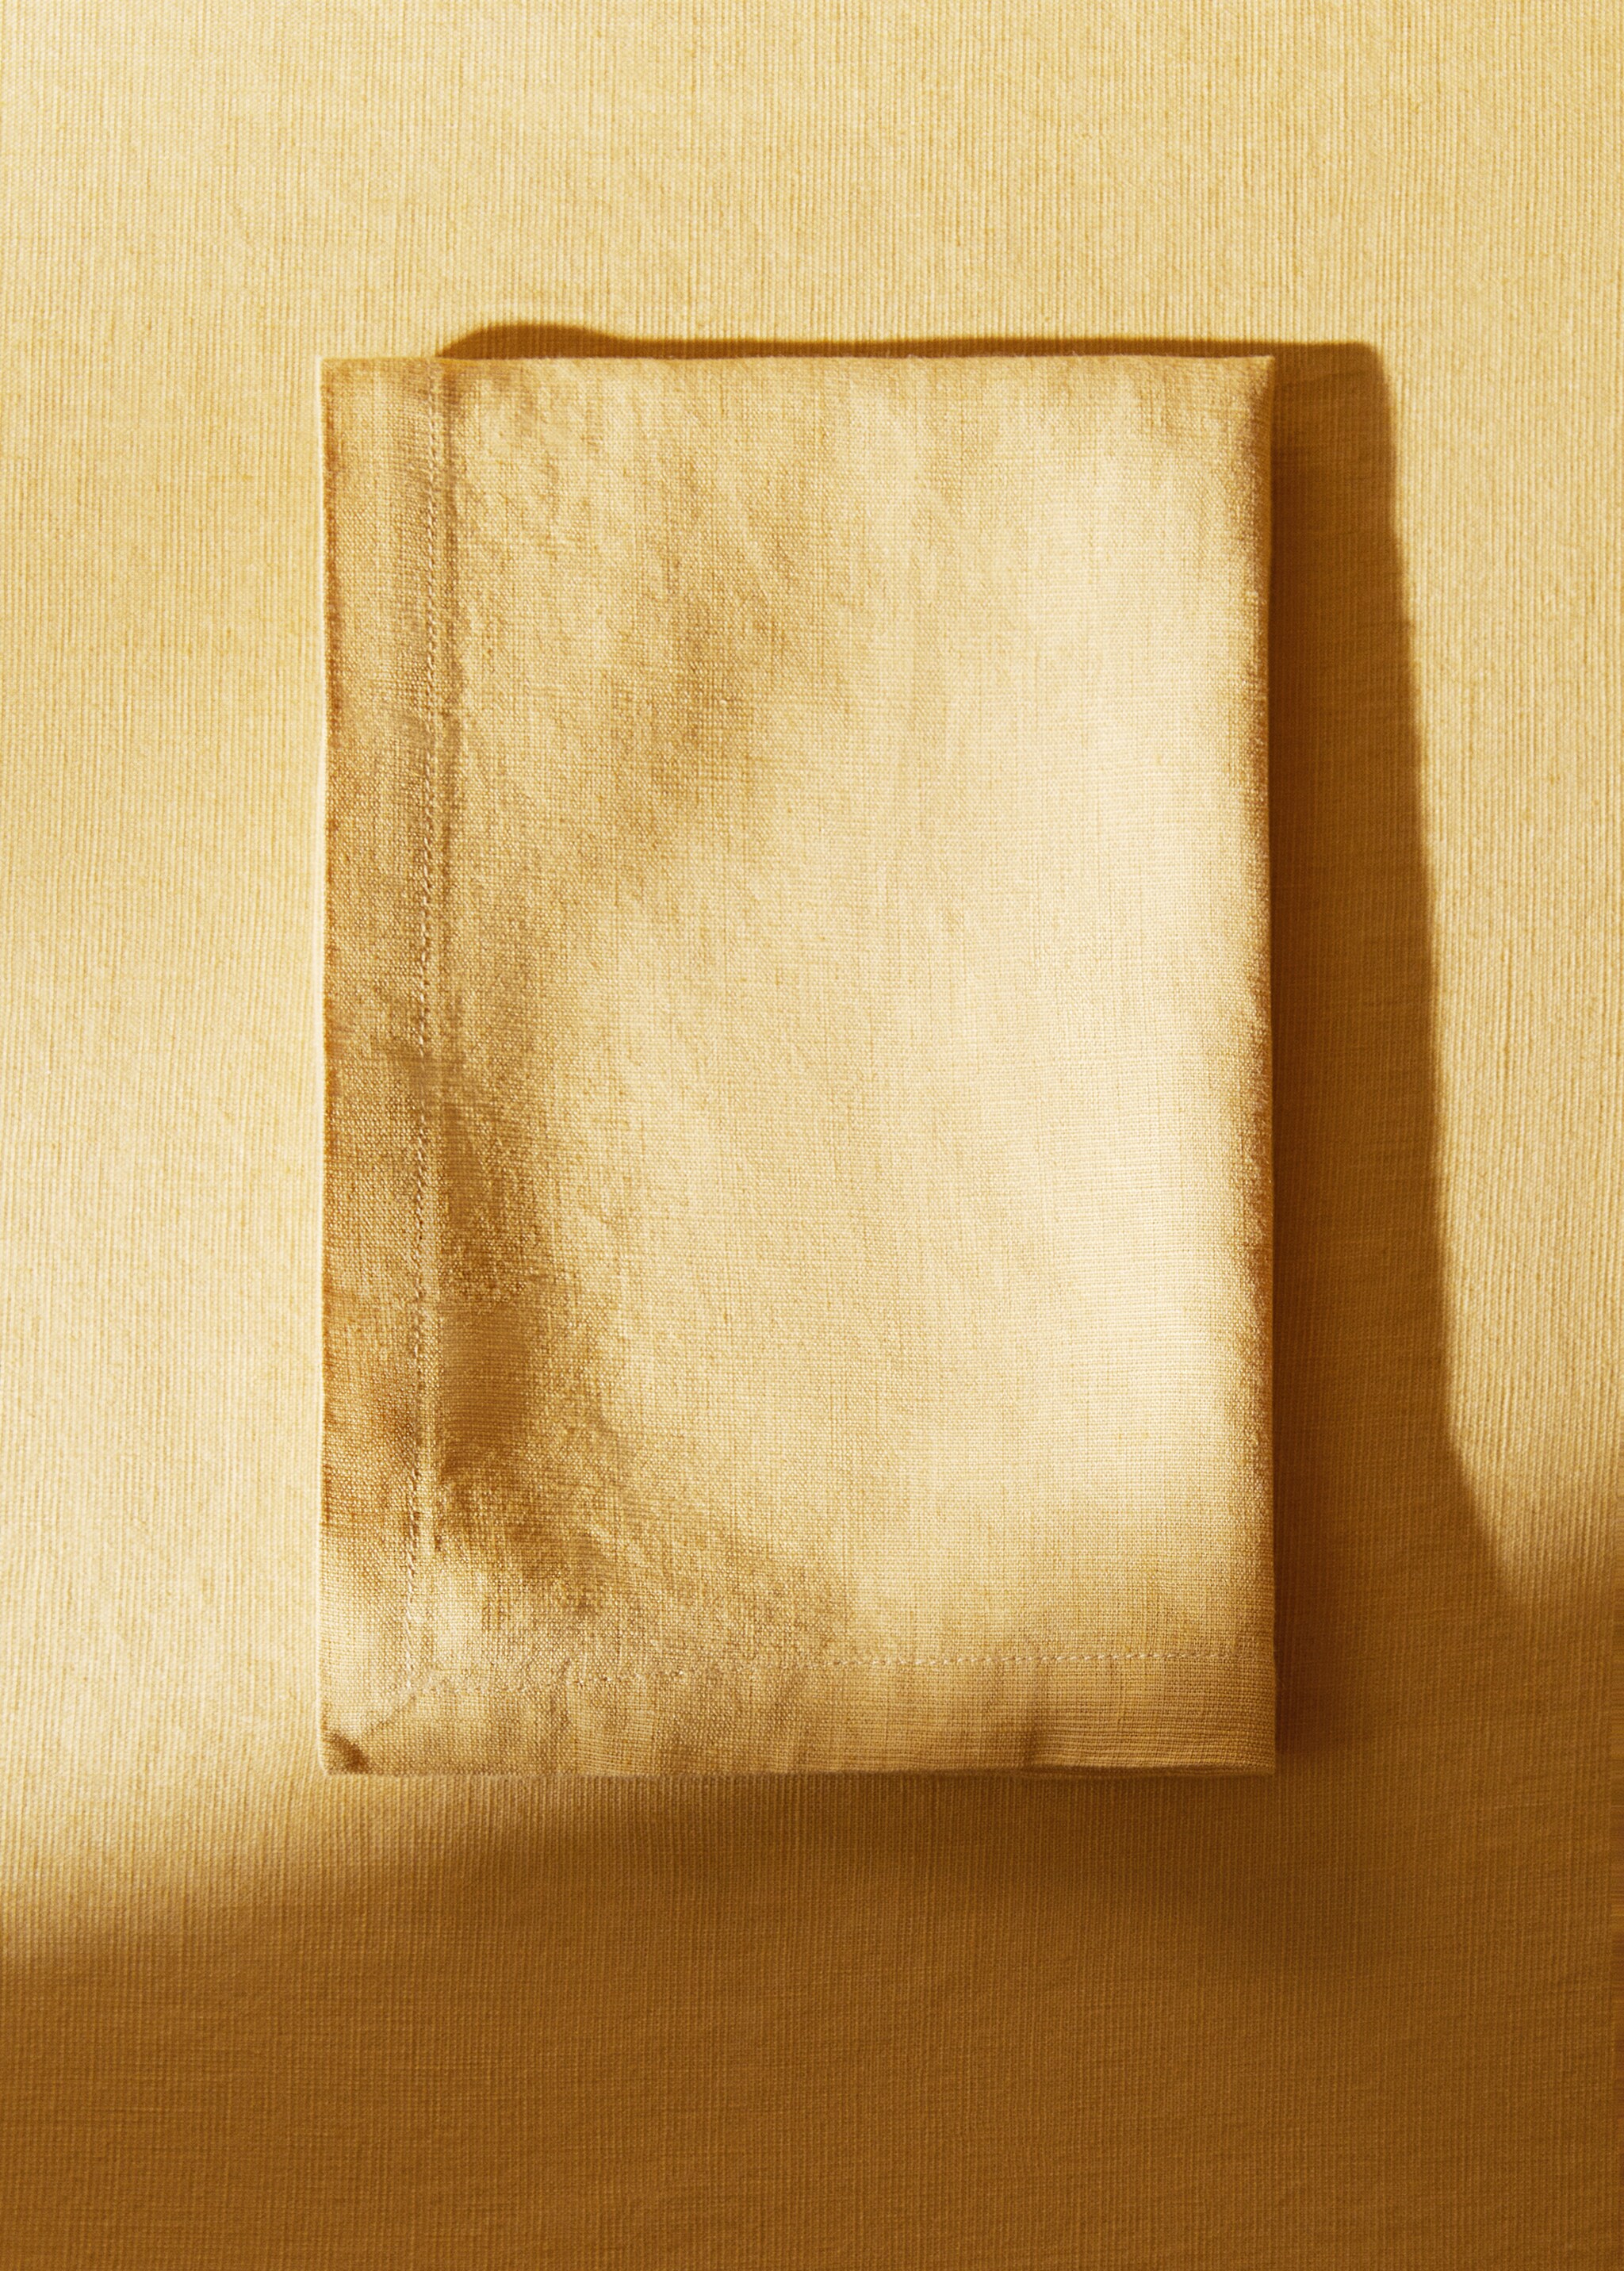 100% linen napkin with stitched details - General plane